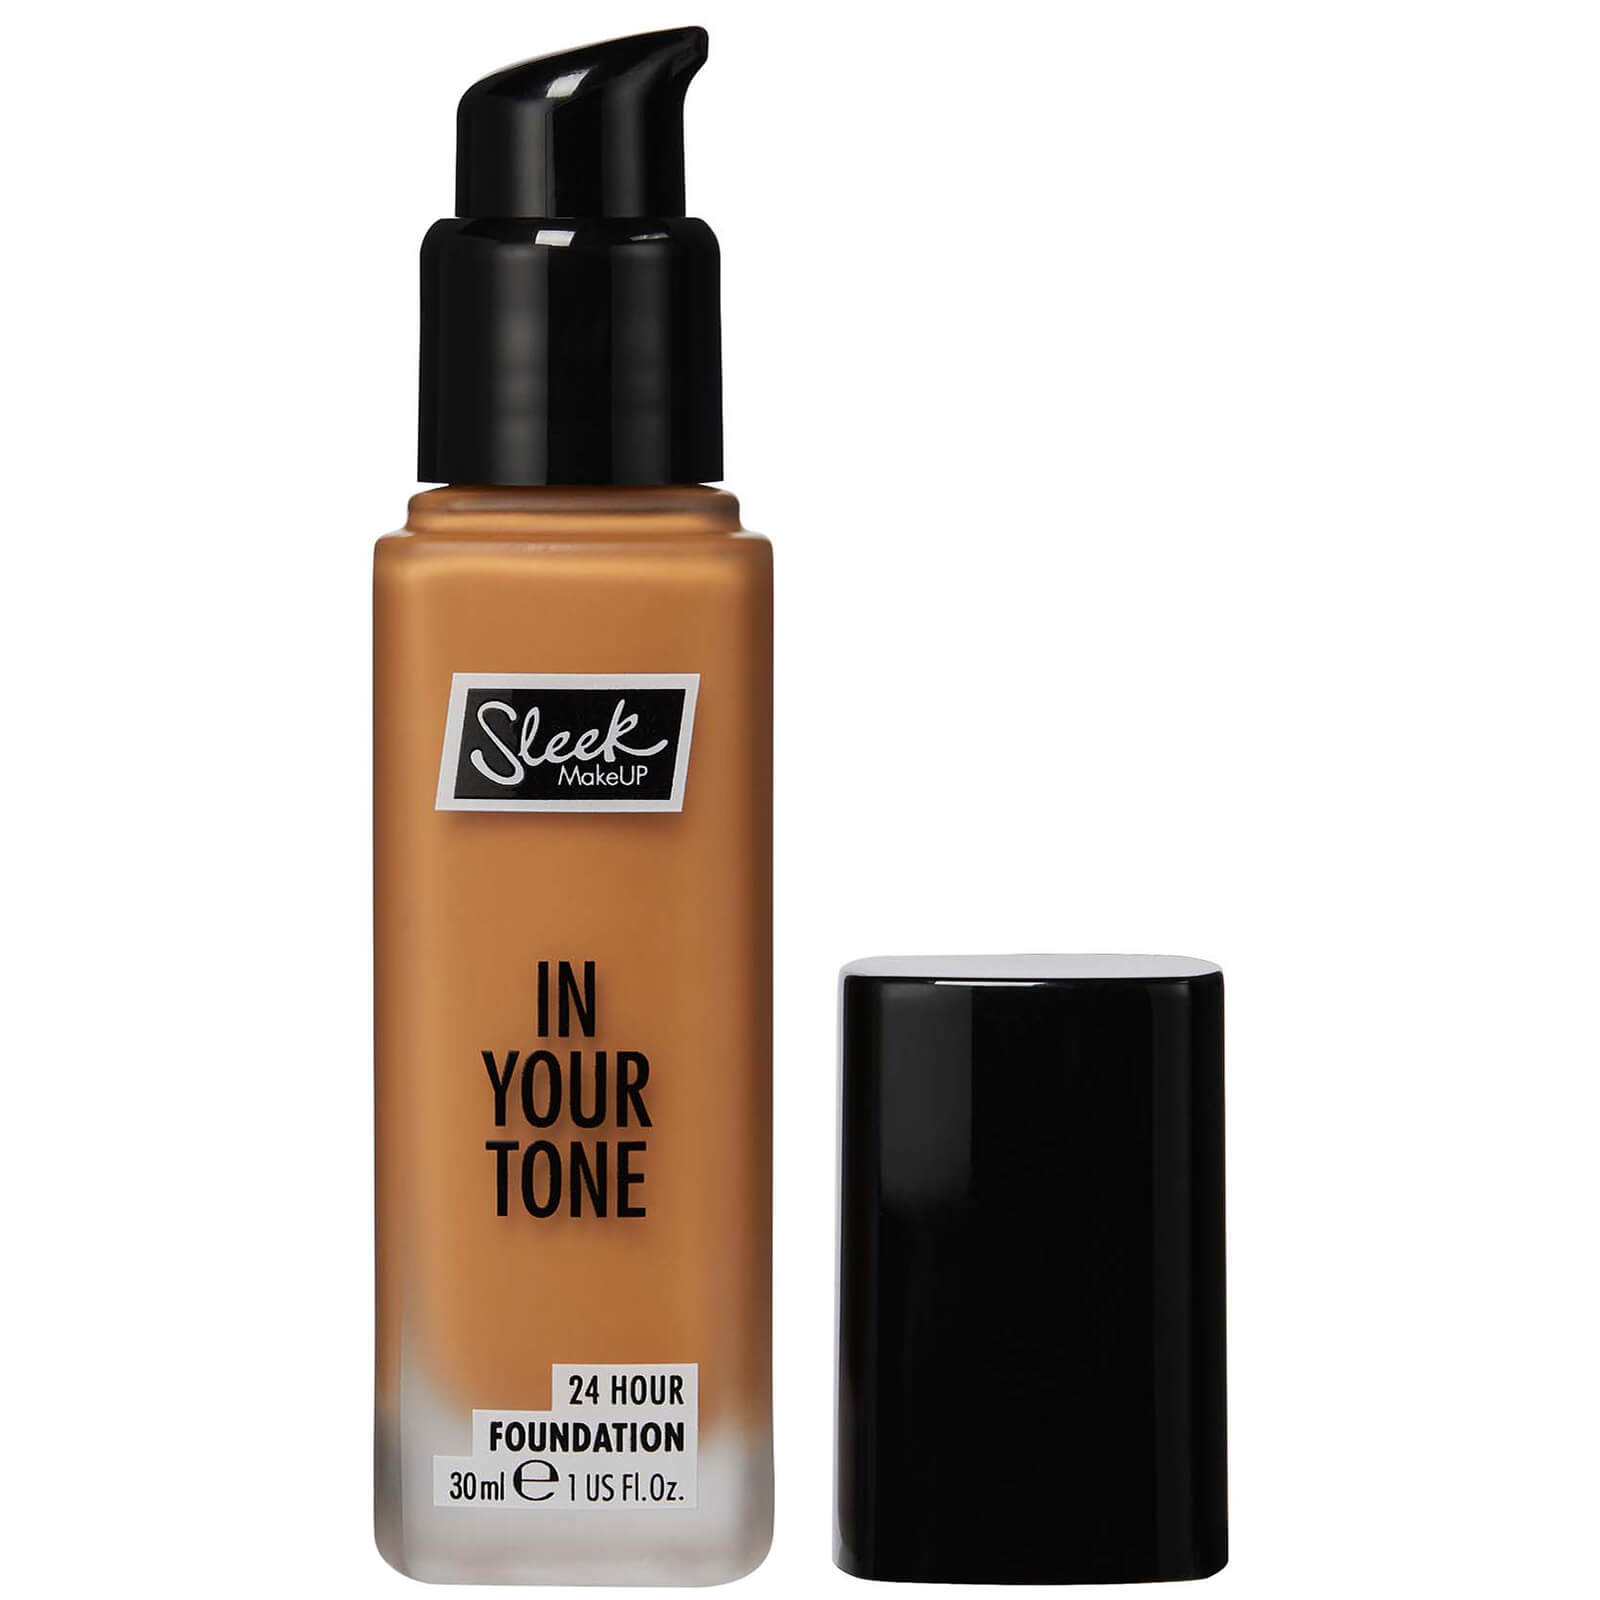 Sleek MakeUP in Your Tone 24 Hour Foundation 30ml (Various Shades) - 8N